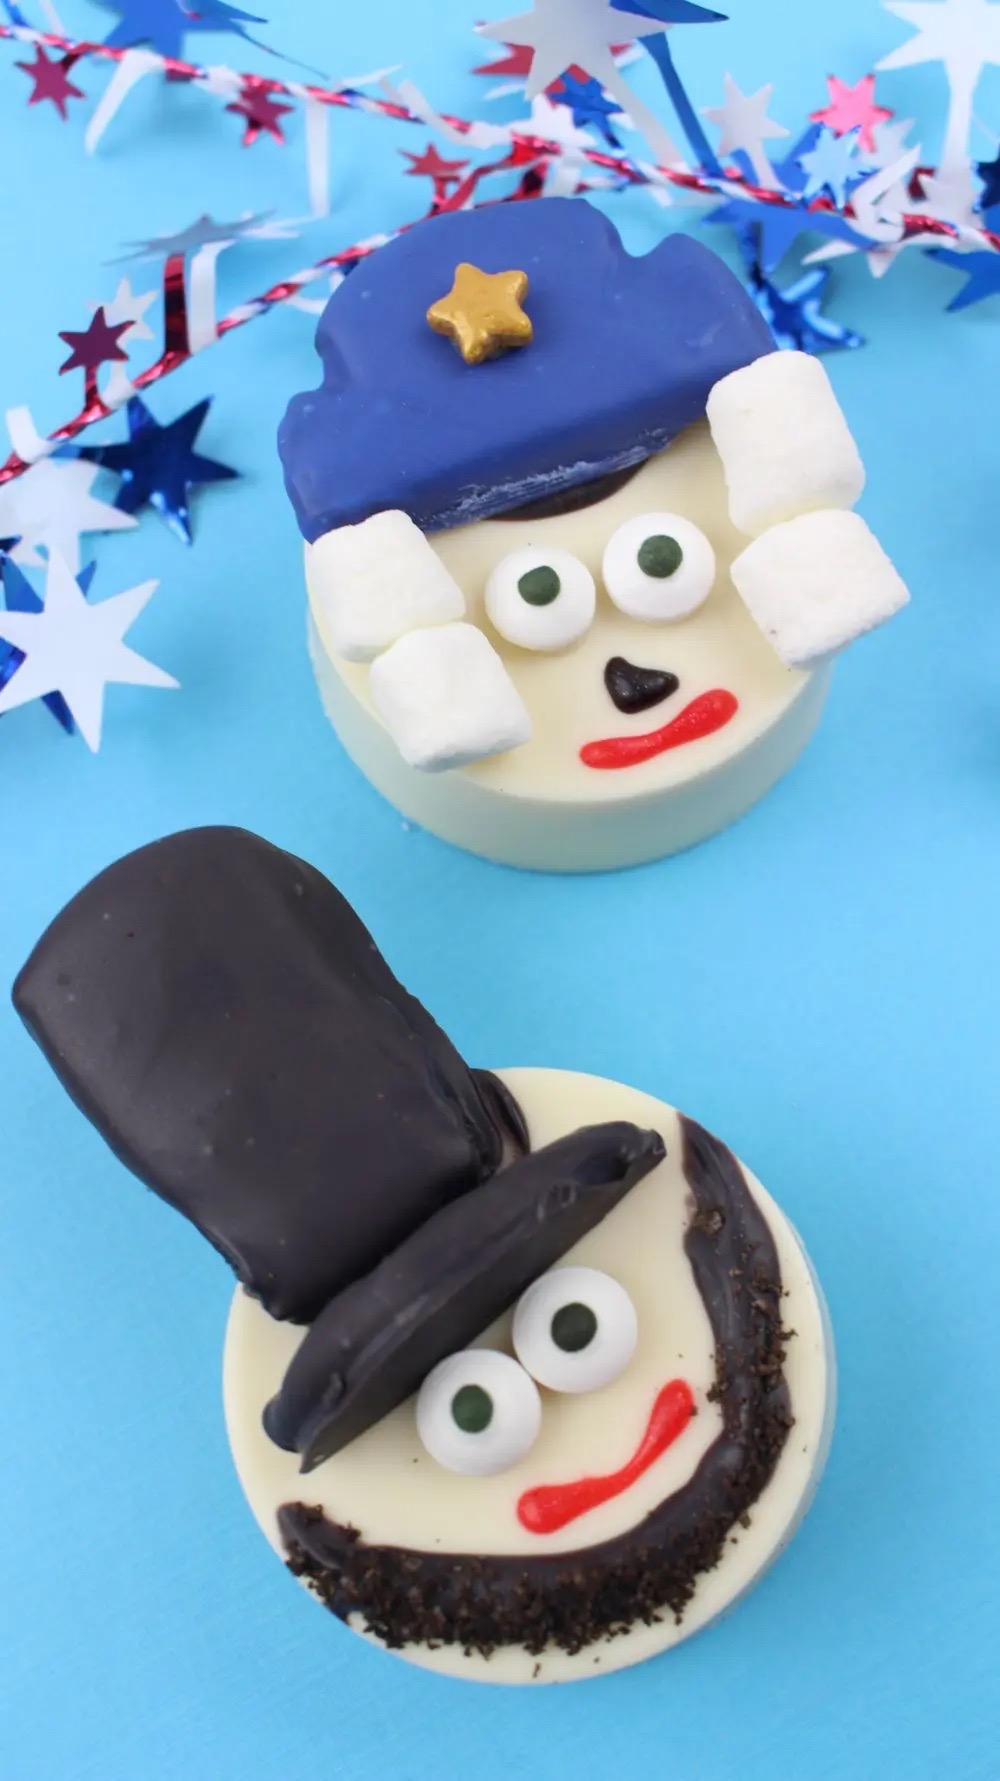 Oreo Treats that are decorated to resemble presidents